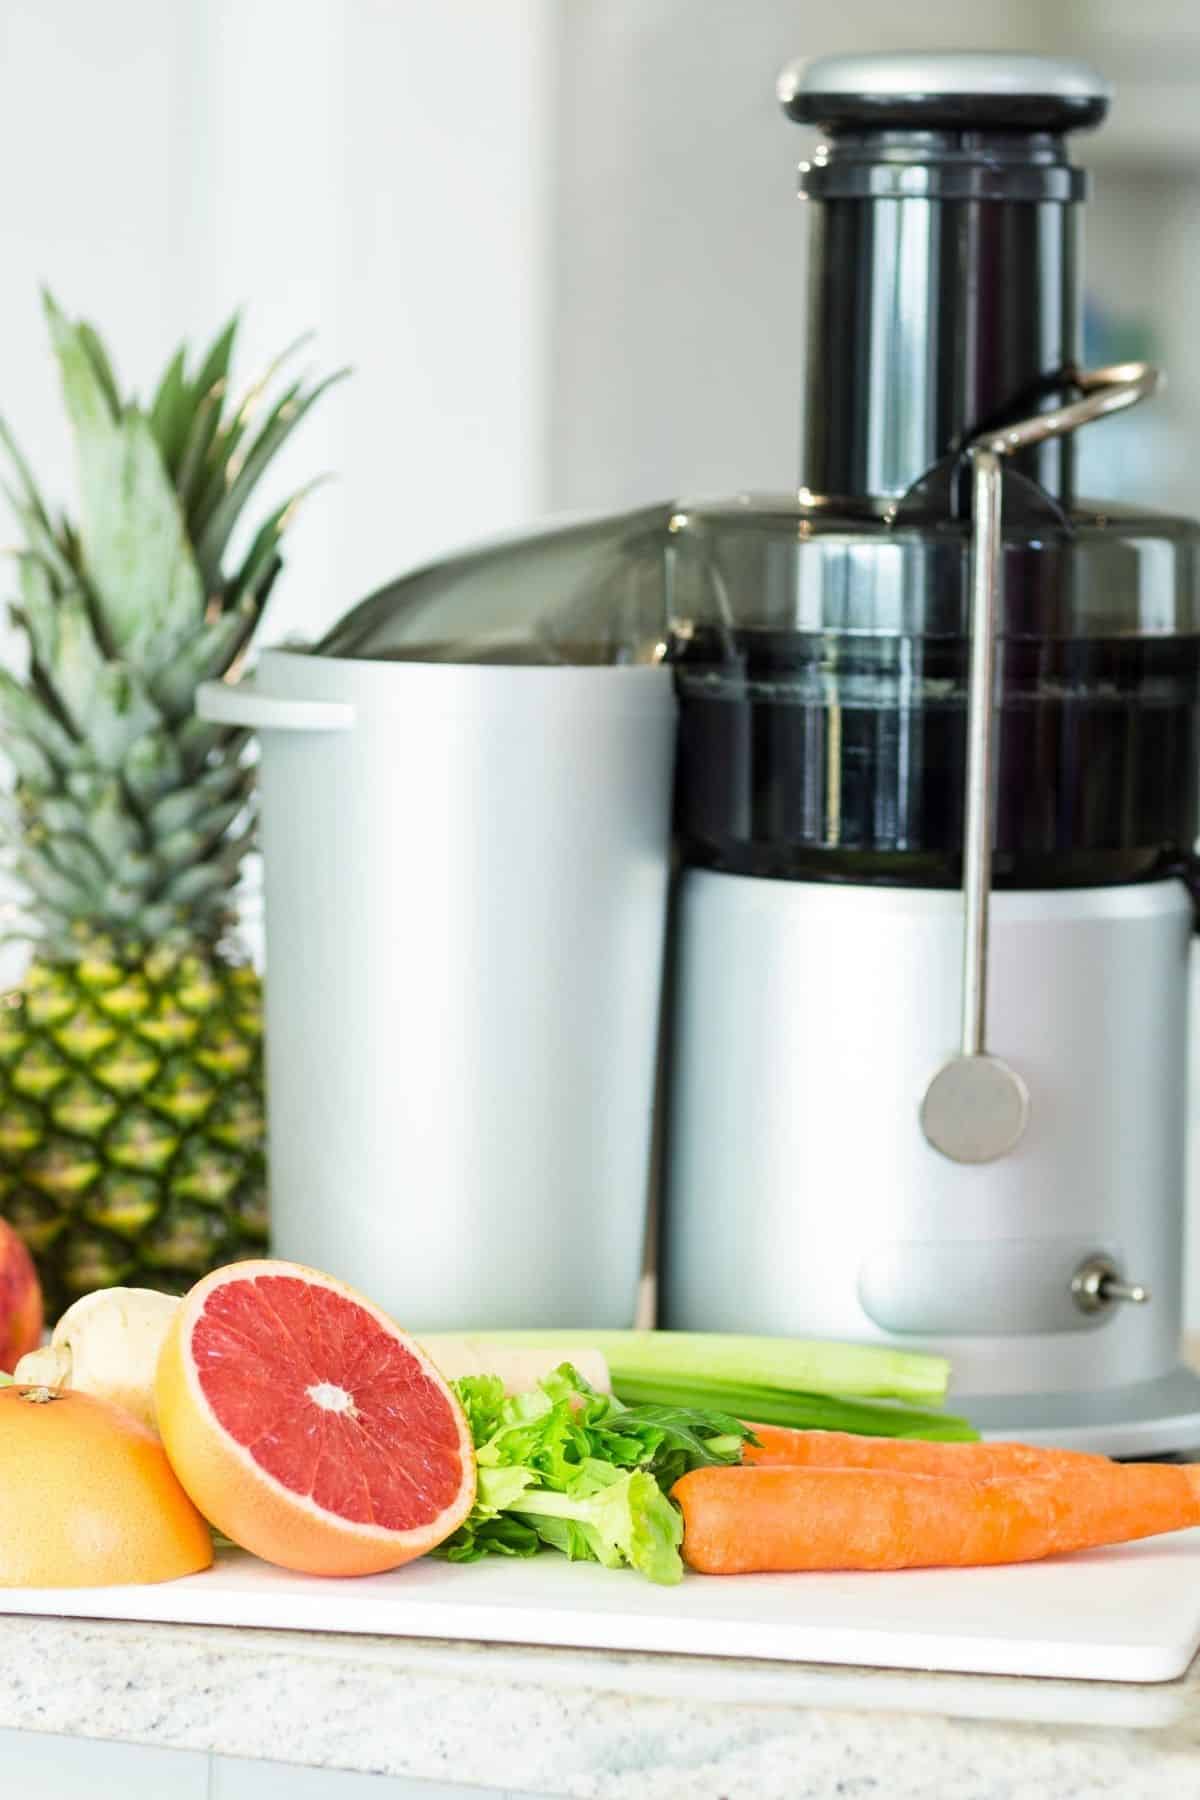 centrifugal juicer on a kitchen countertop